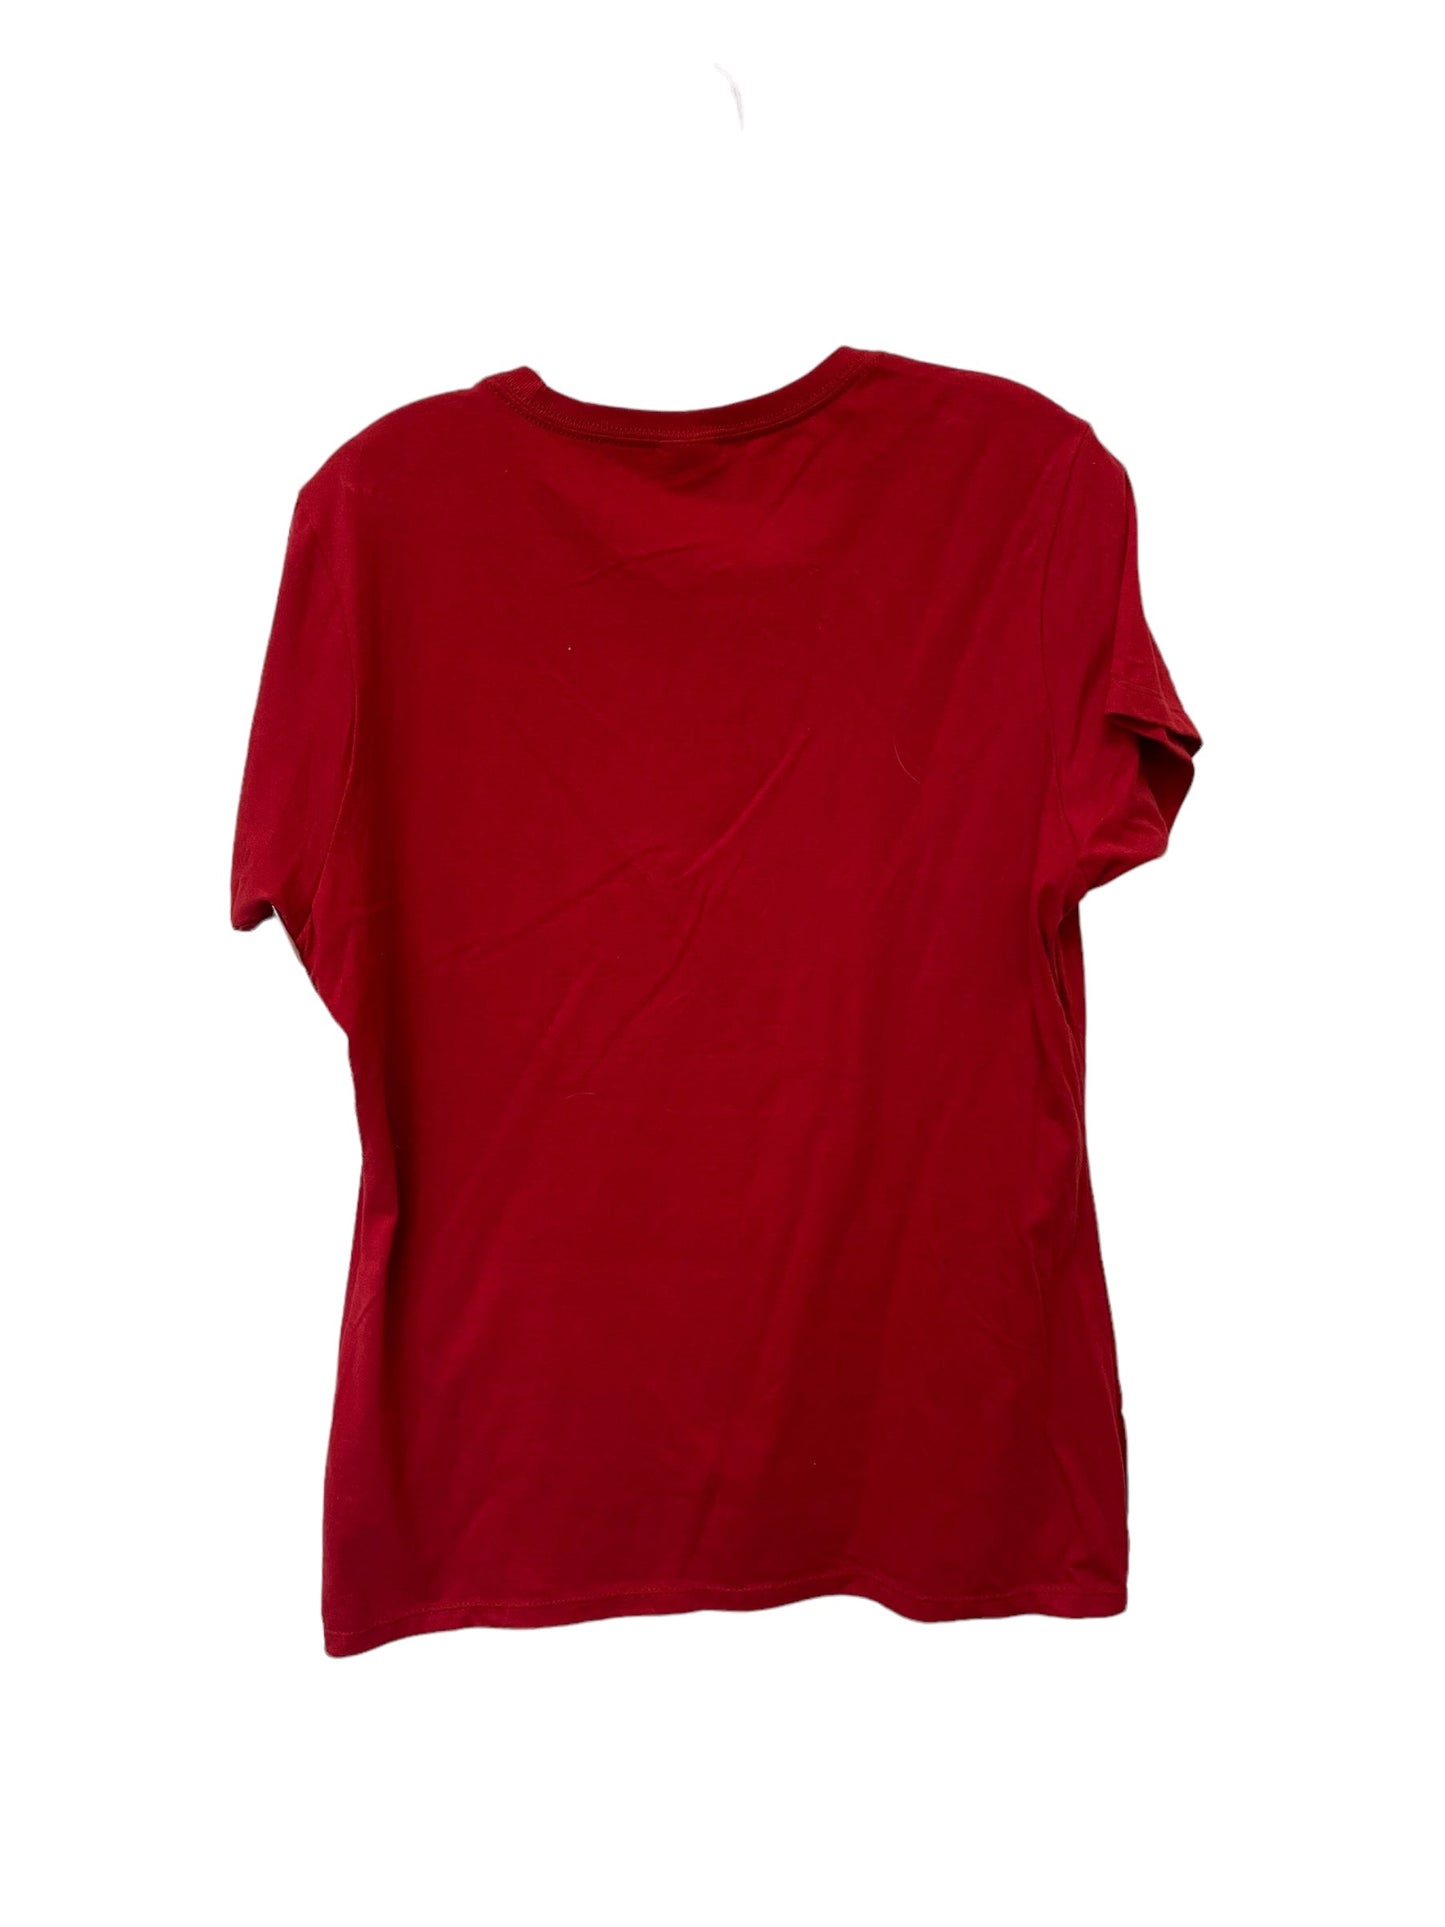 Red Top Short Sleeve Clothes Mentor, Size L